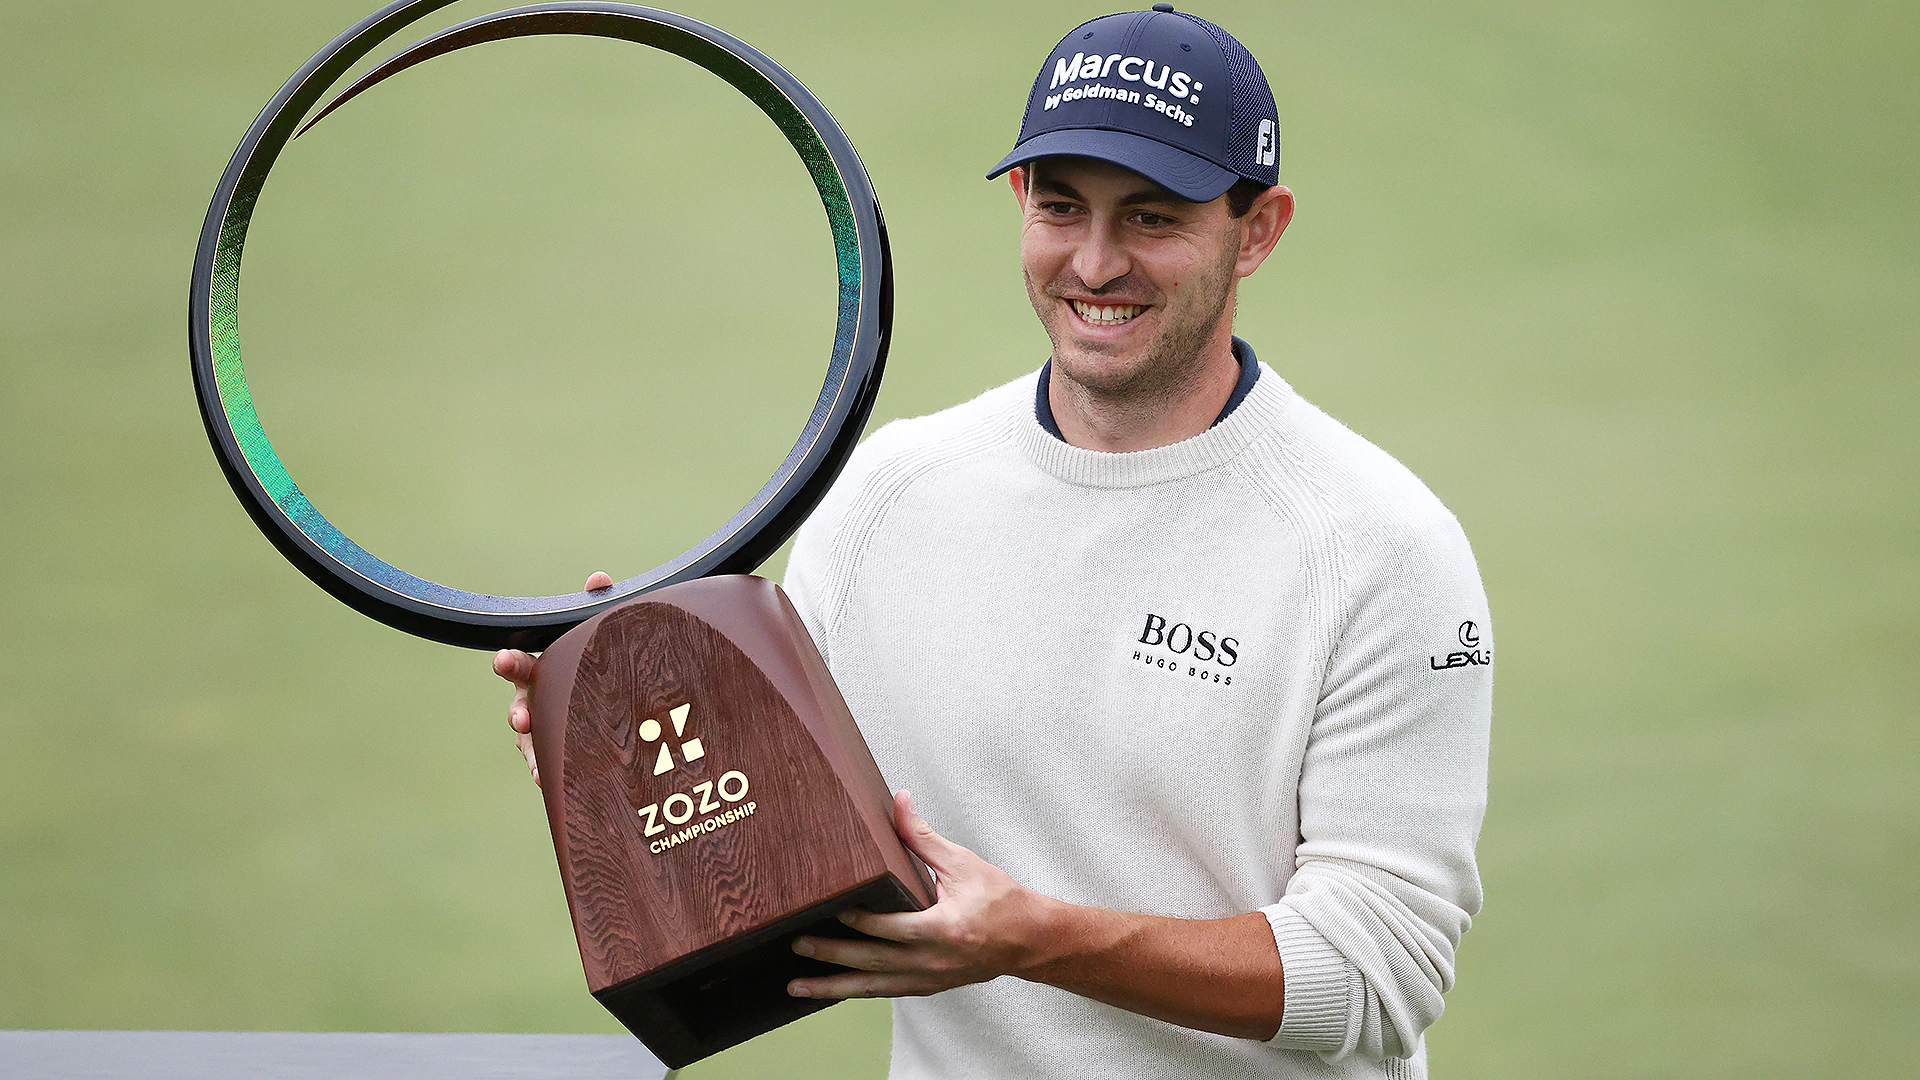 Patrick Cantlay tops world Nos. 2 and 3 to win Zozo Championship